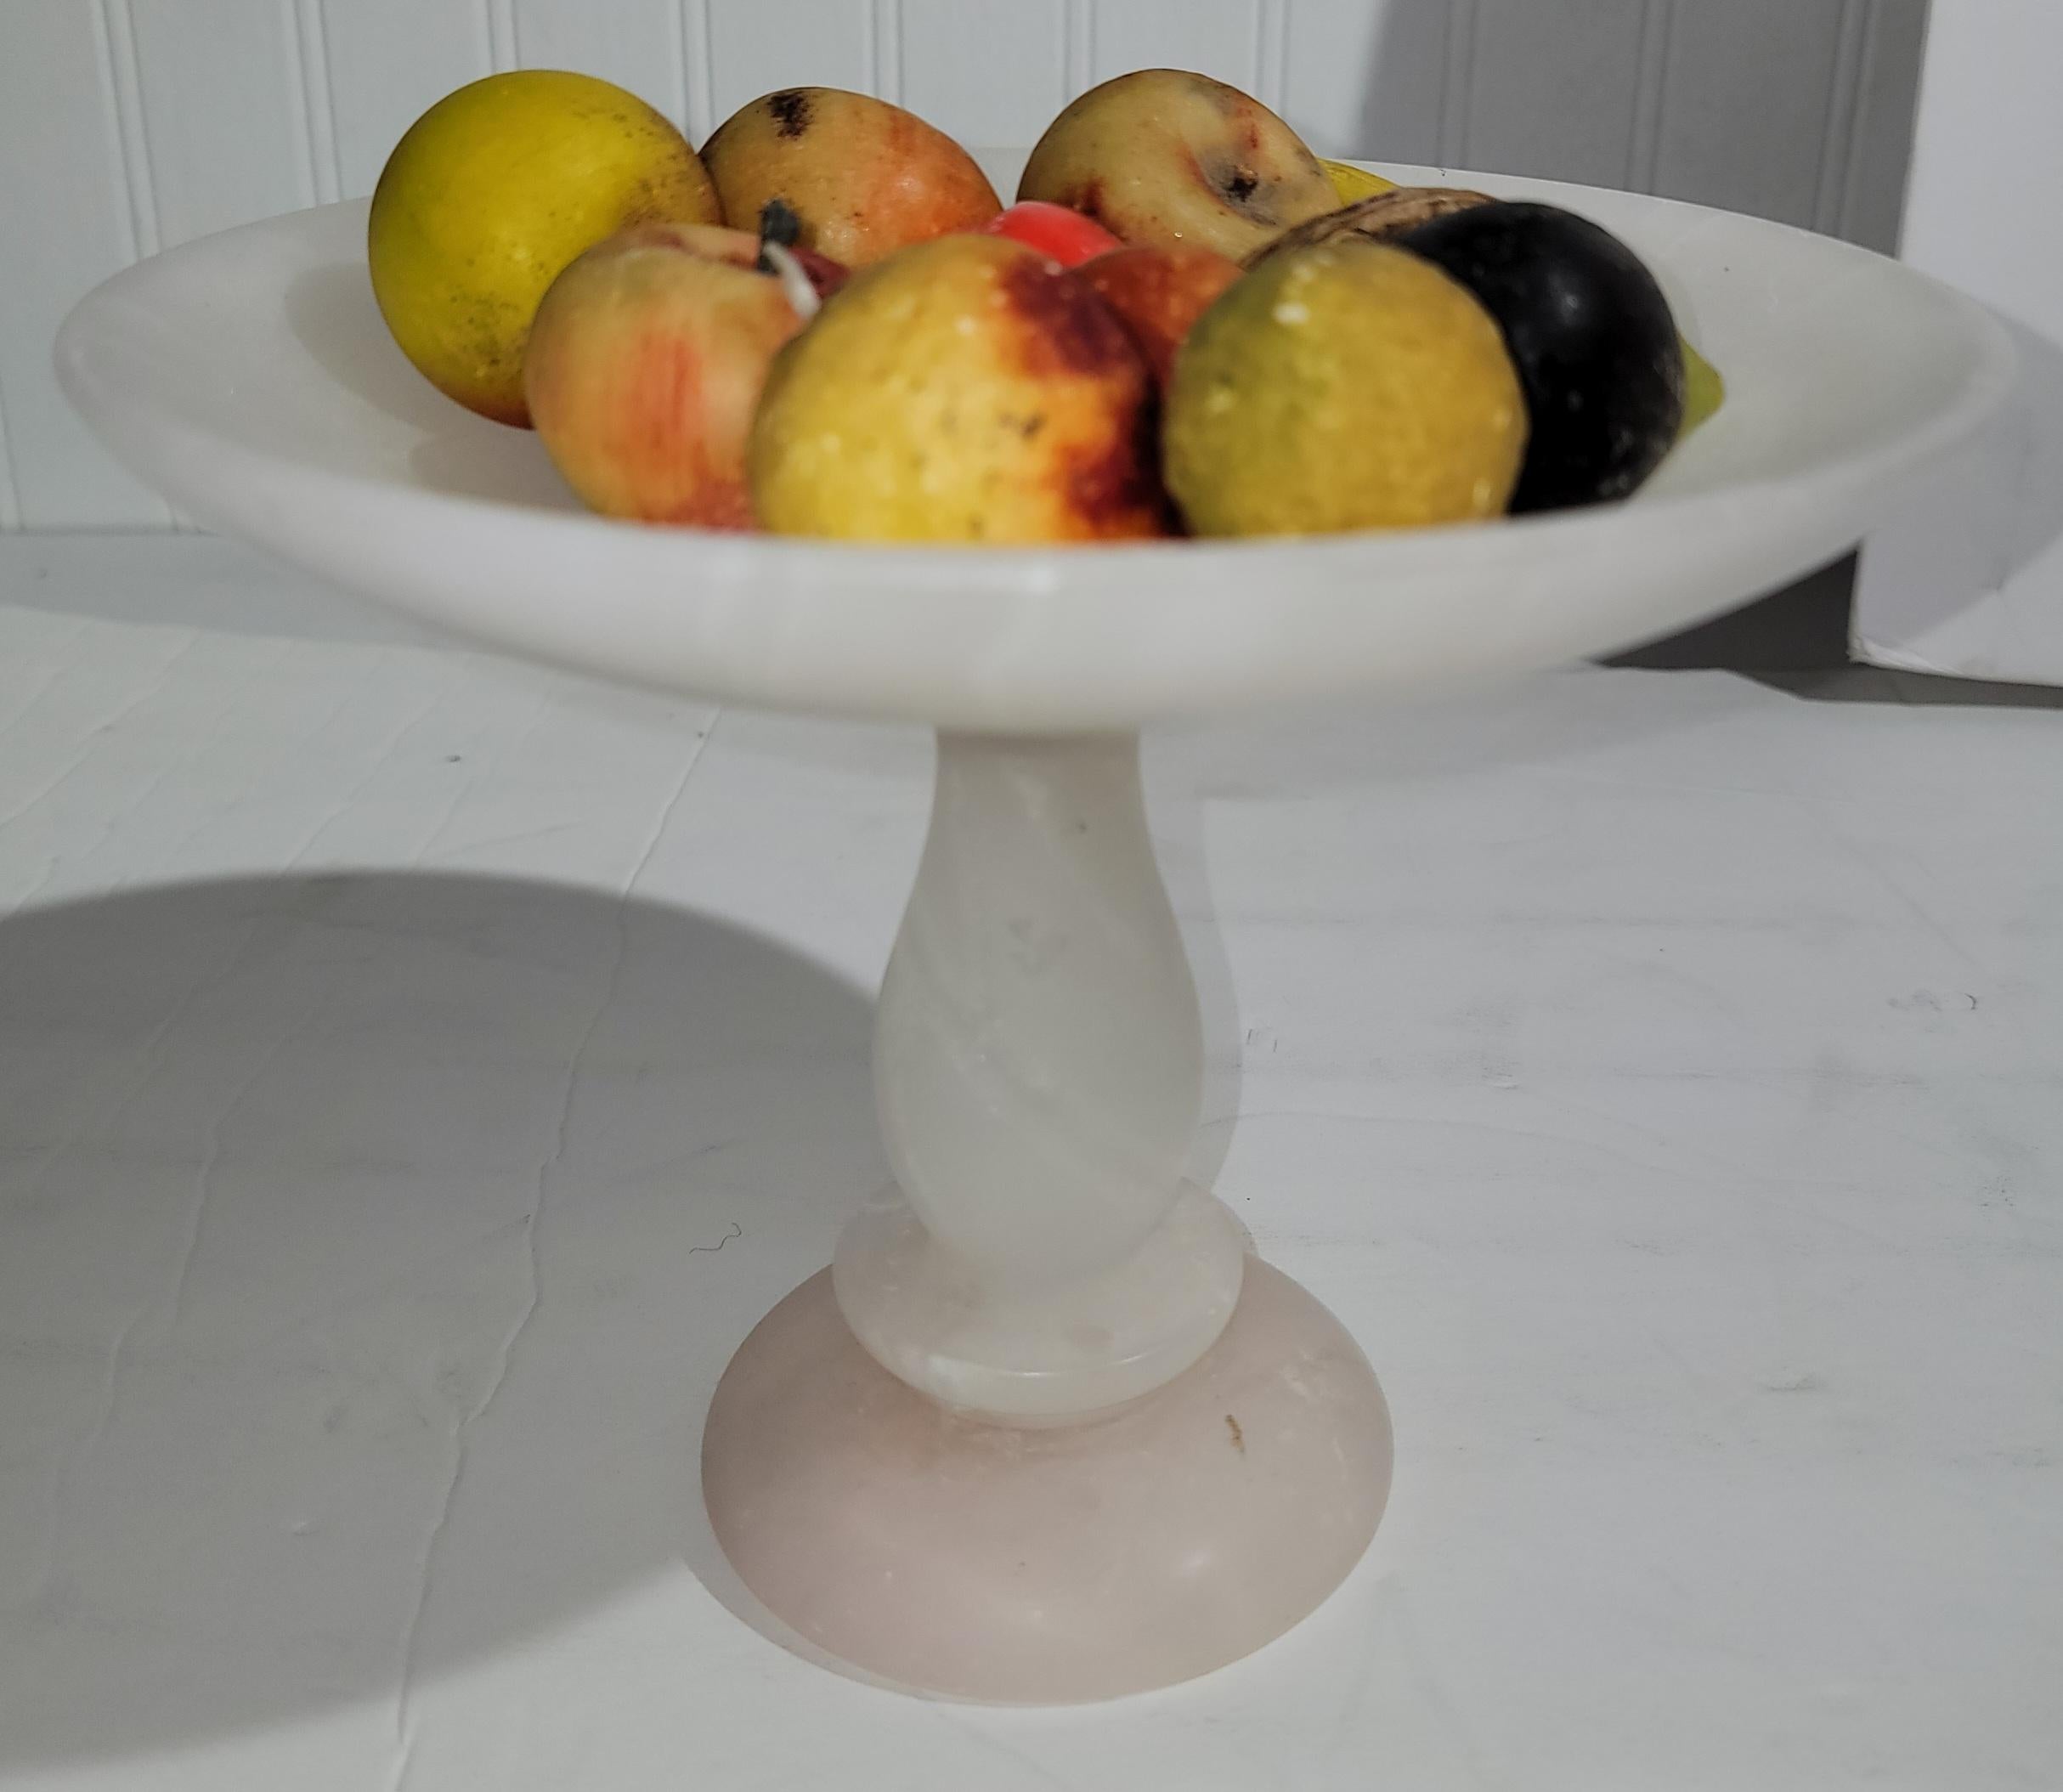 Compote measure approx -5.5diameter x  7.5 high 
Each piece of fruit and the nut measure roughly 1.5 inches each.Total of twelve pieces of stone fruit.